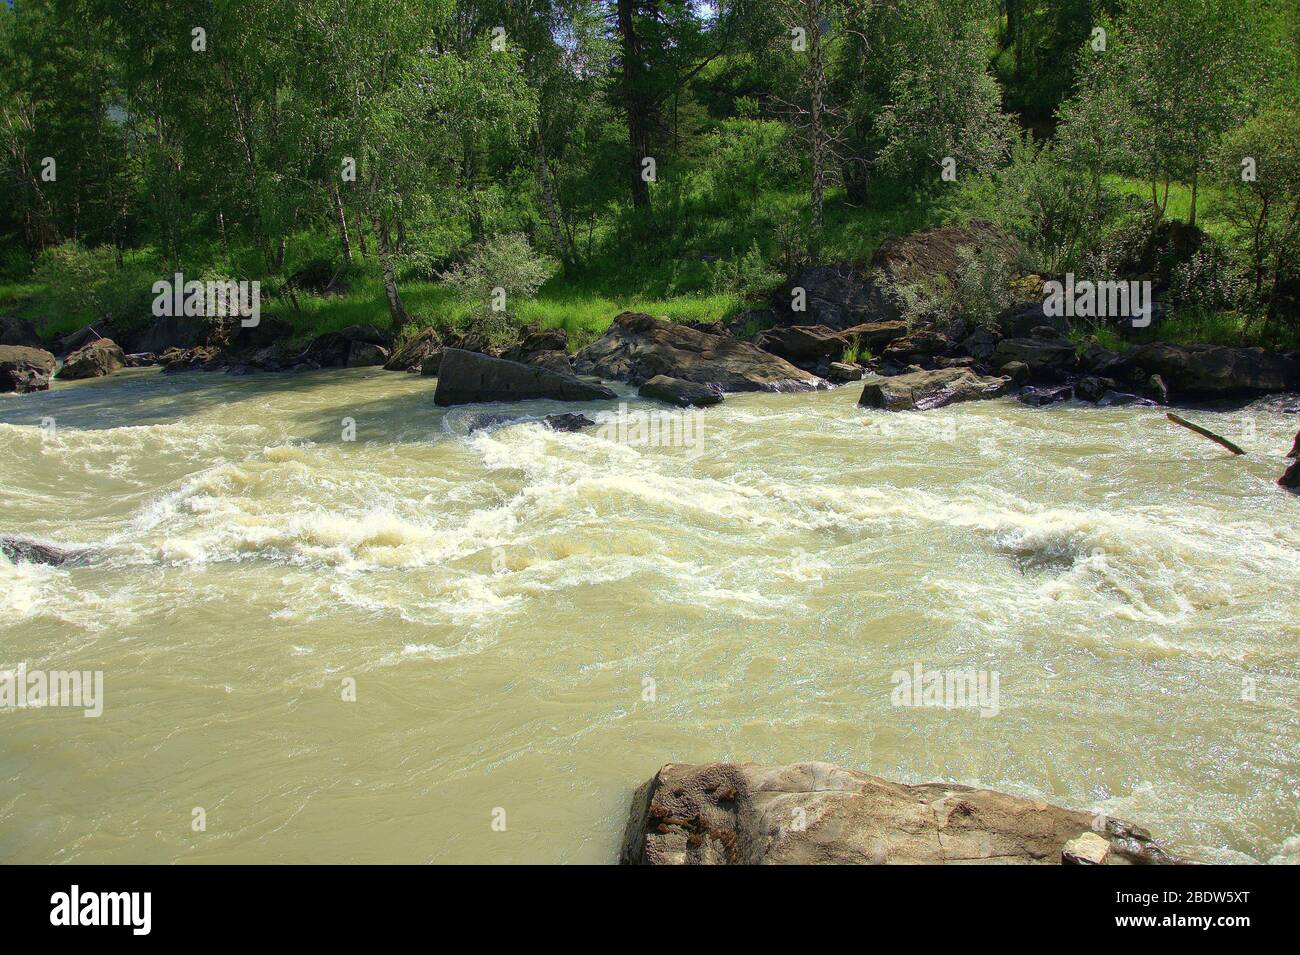 A section of a stormy green river flowing through a forest on rocky shores. Close-up. Stock Photo